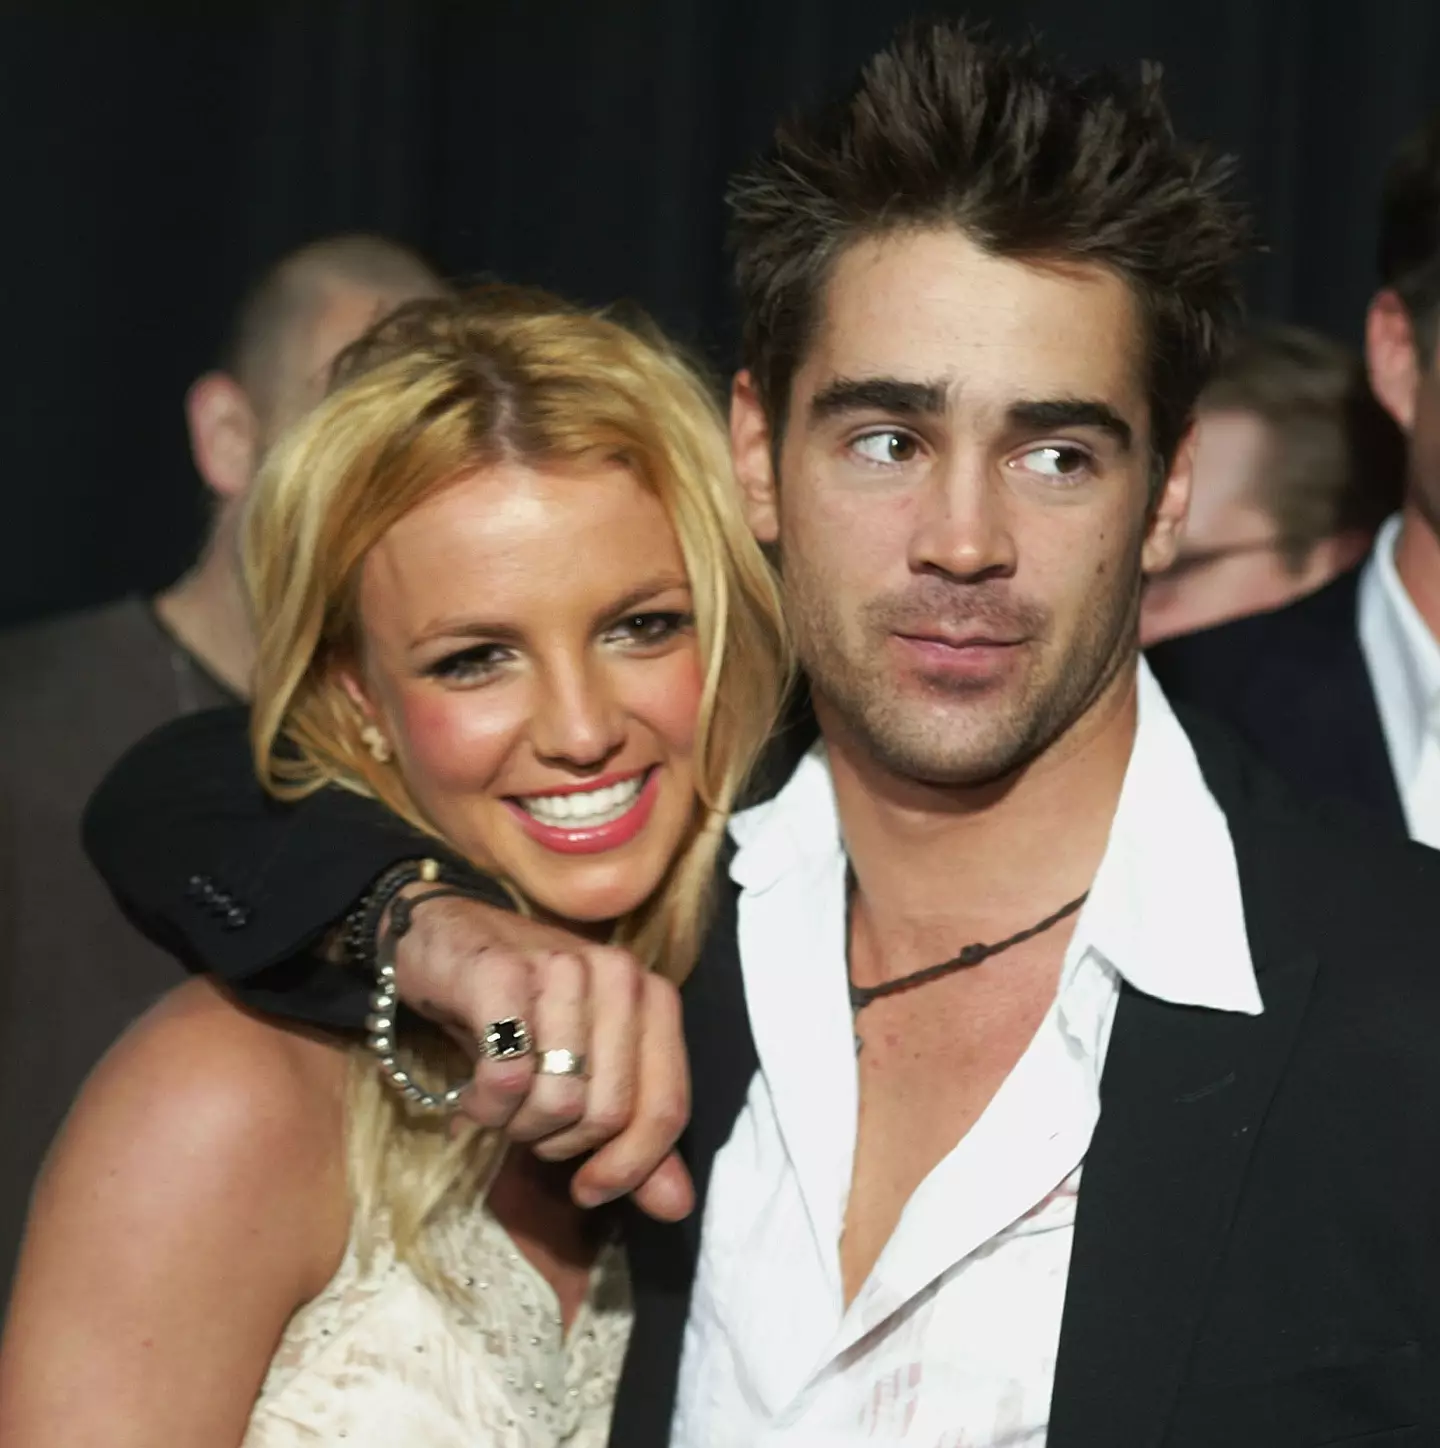 Britney Spears met Colin Farrell through a ‘club promoter friend’.